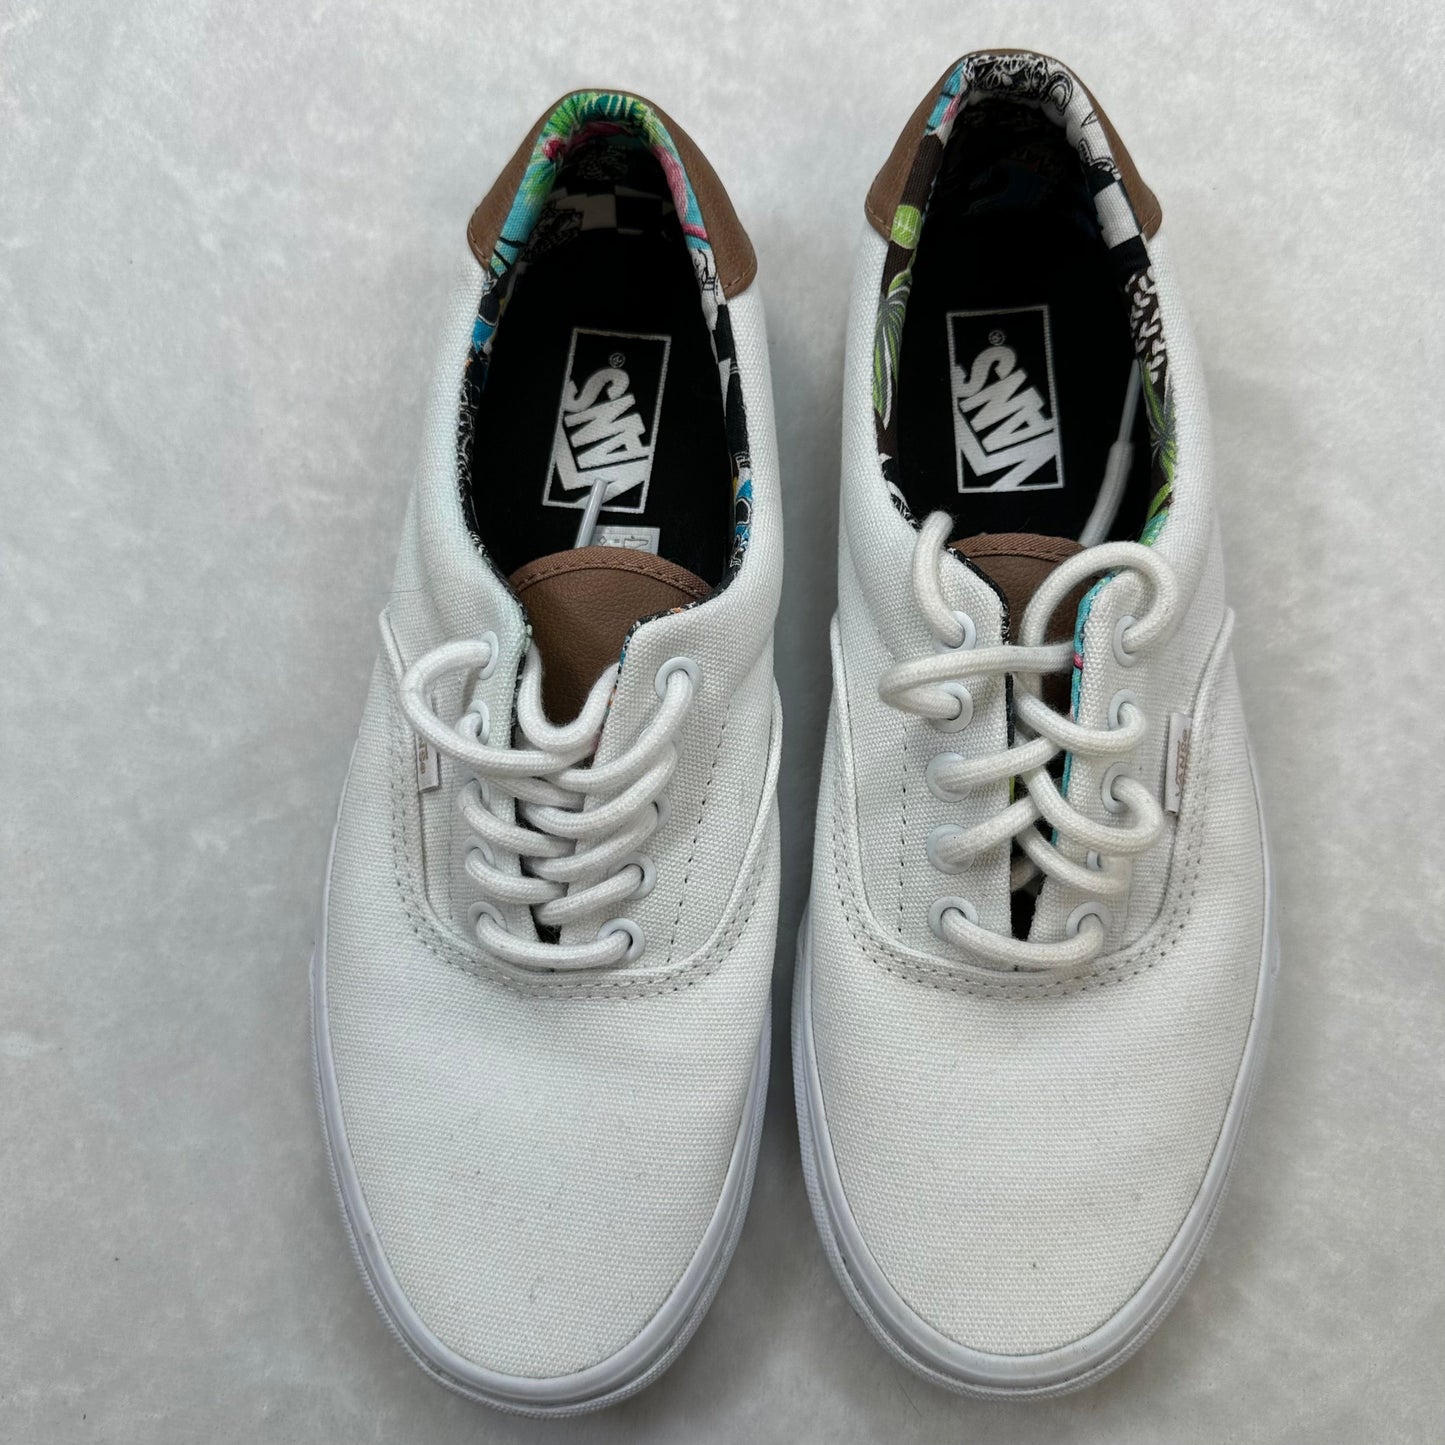 Shoes Flats Boat By Vans  Size: 10.5